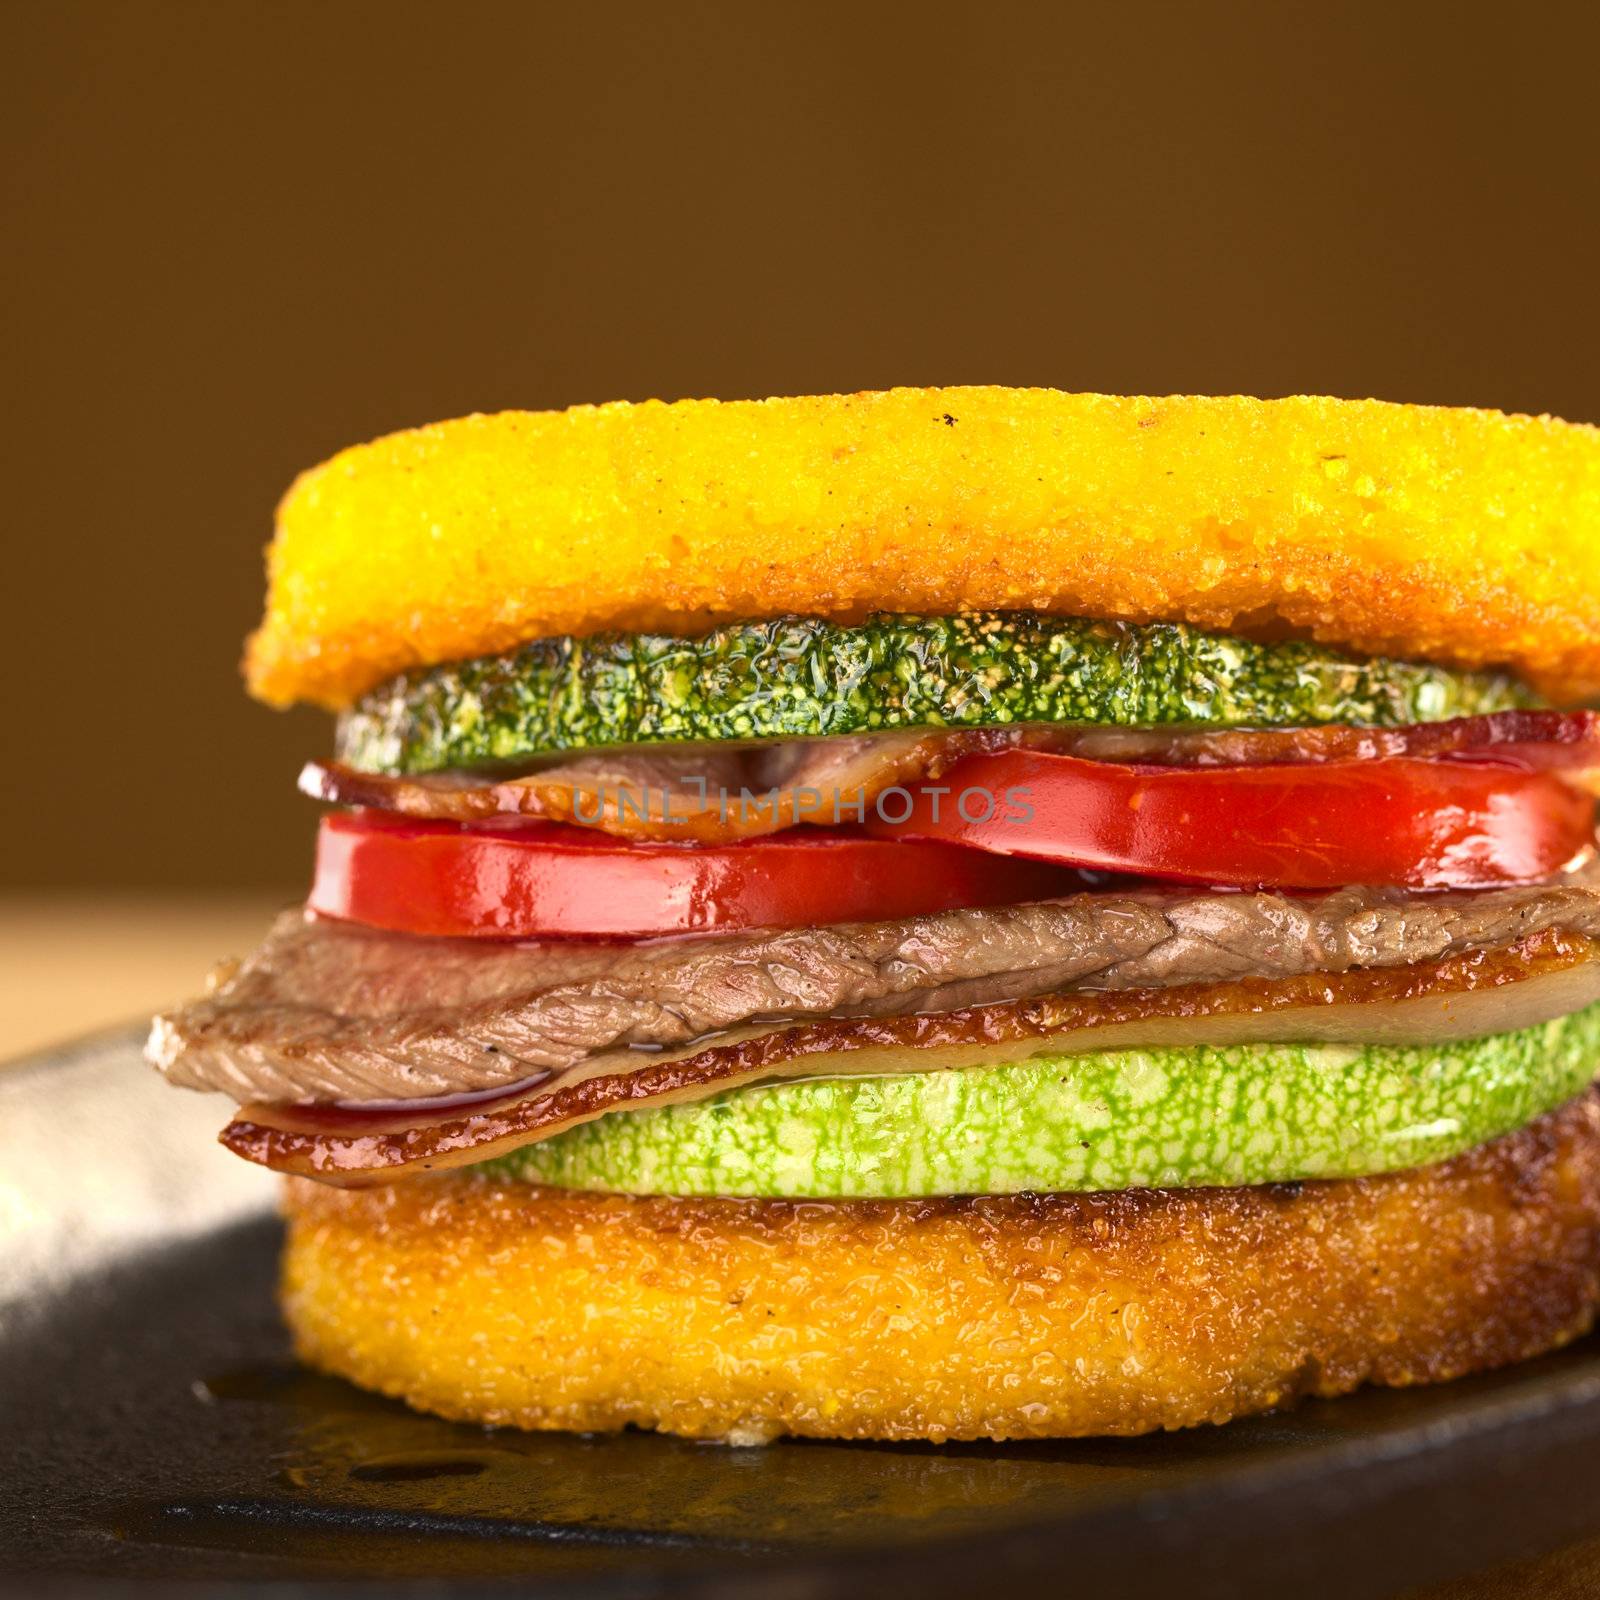 Polenta burger with fried zucchini, bacon, beef and tomato (Selective Focus, Focus on the front of the burger)